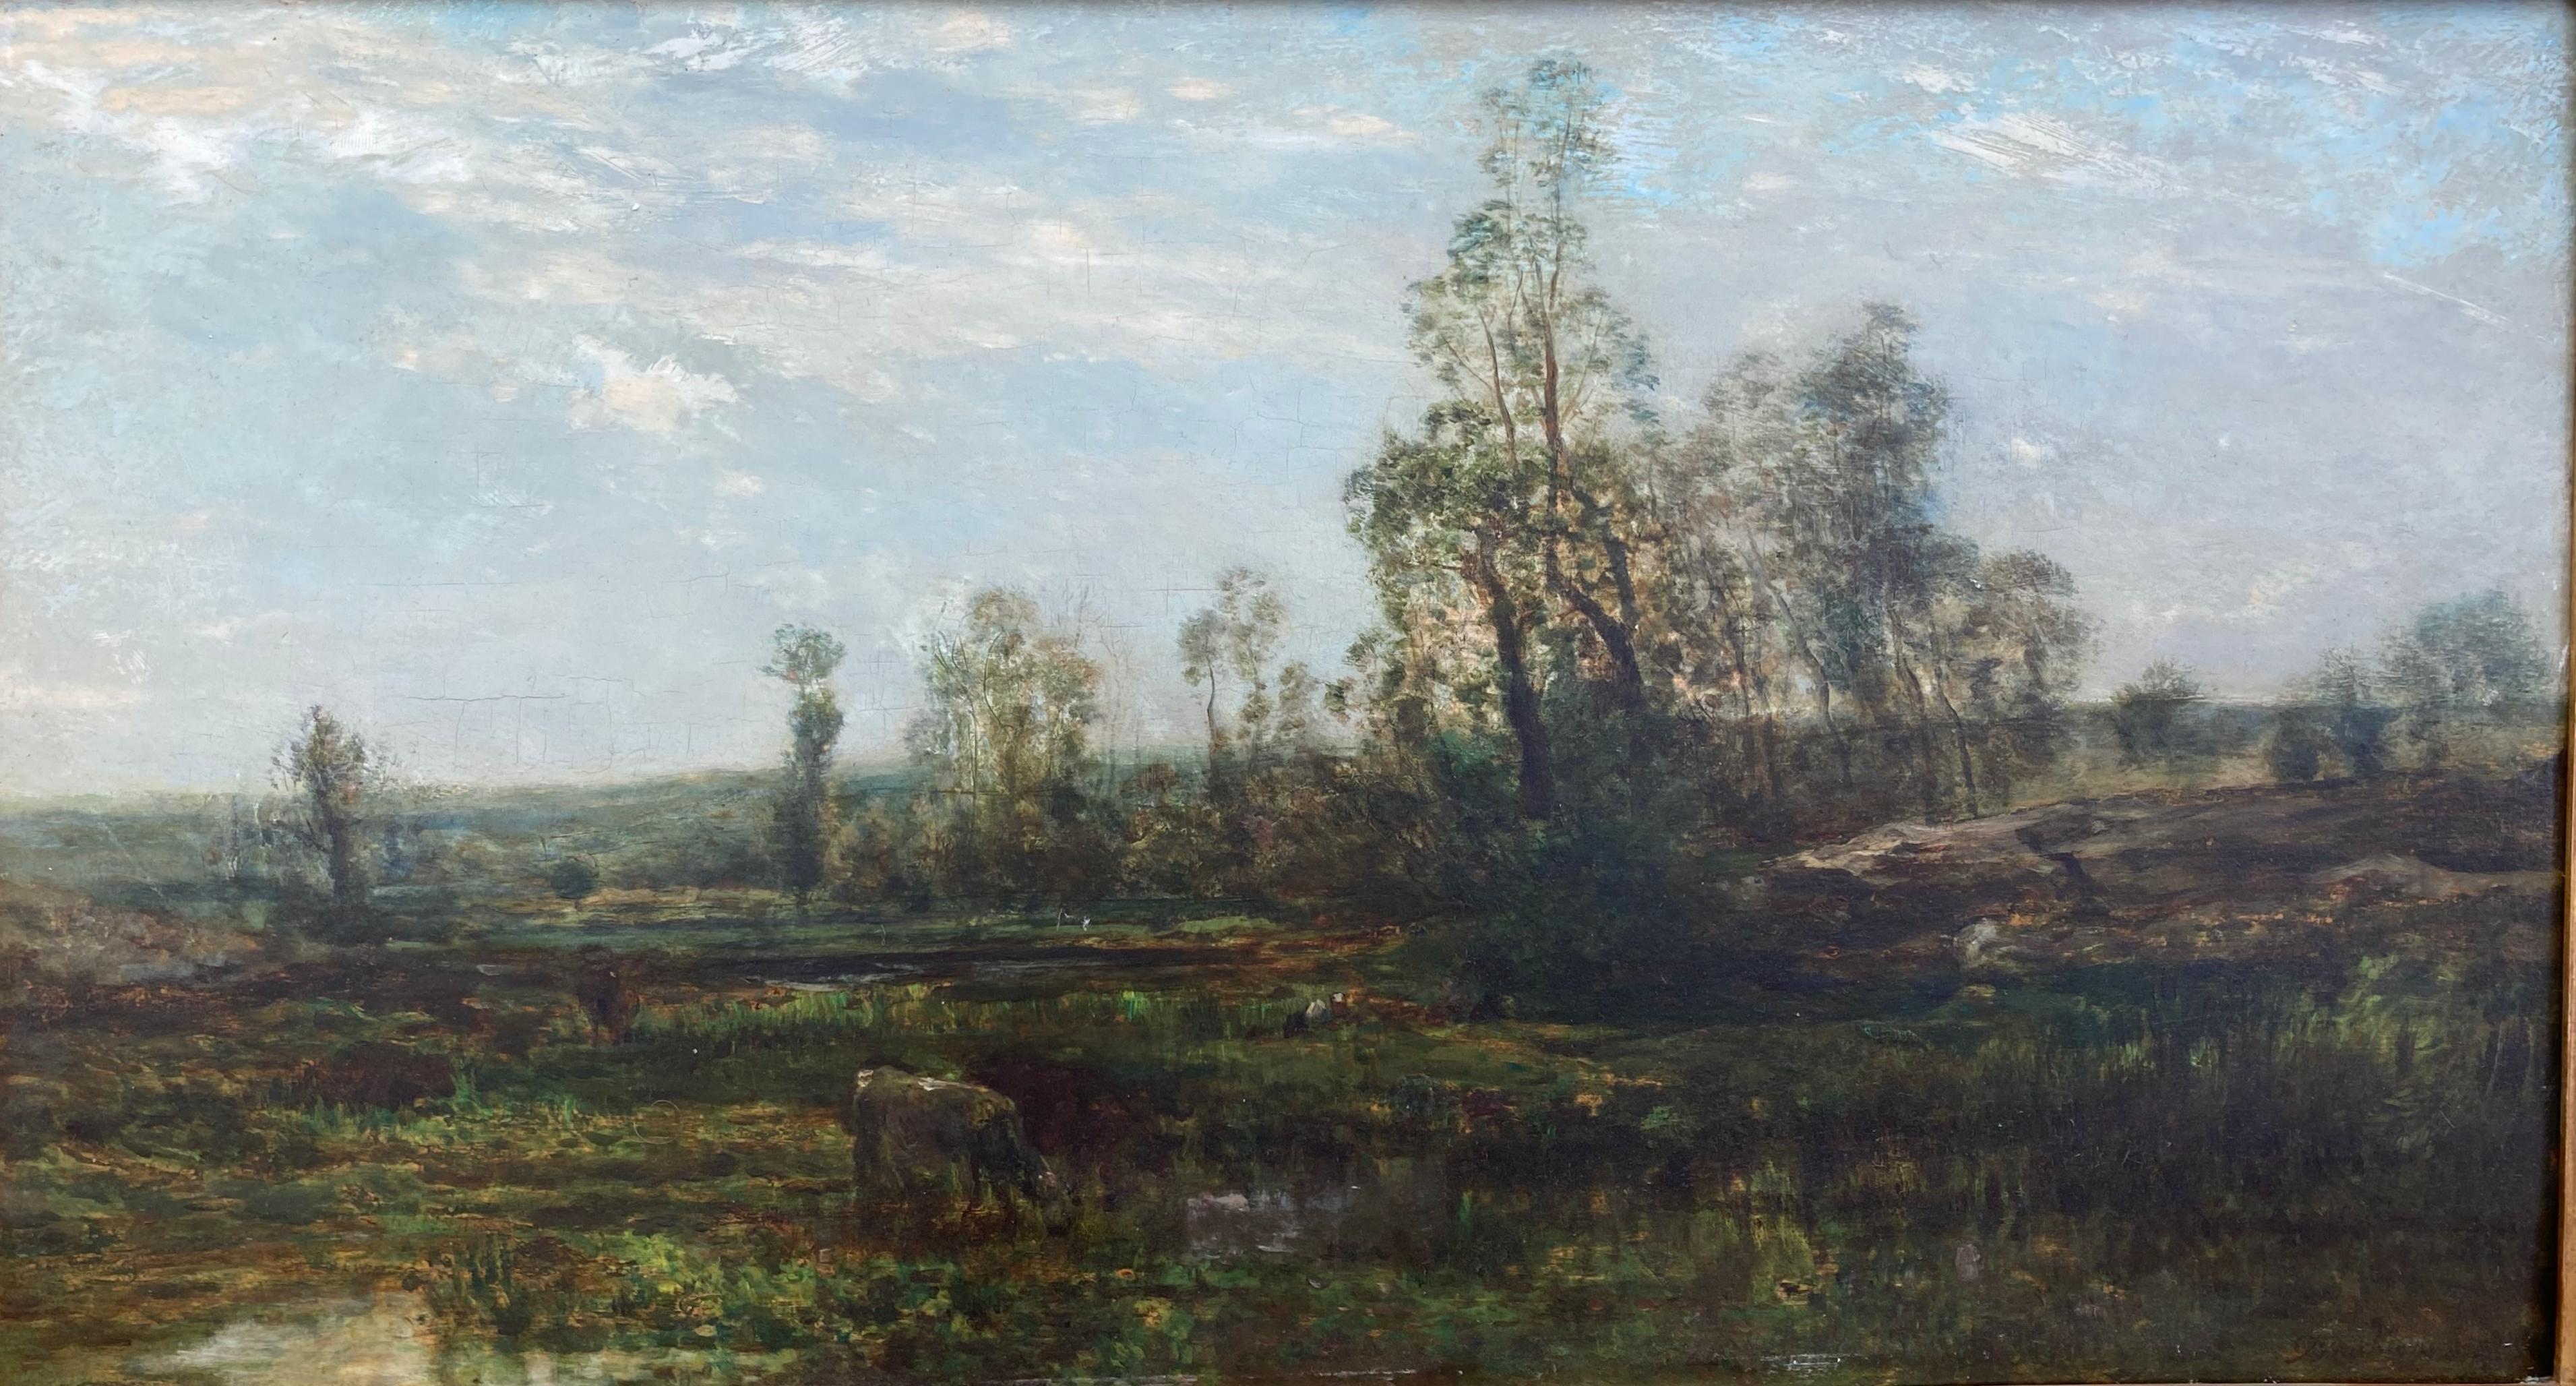 An oil on wood panel in stunningly good condition by renowned Barbizon painter Charles Daubigny. Everything checks out here: the signature, examination under UV light, the age of the wood panel, the fact that it is on a panel in the first place